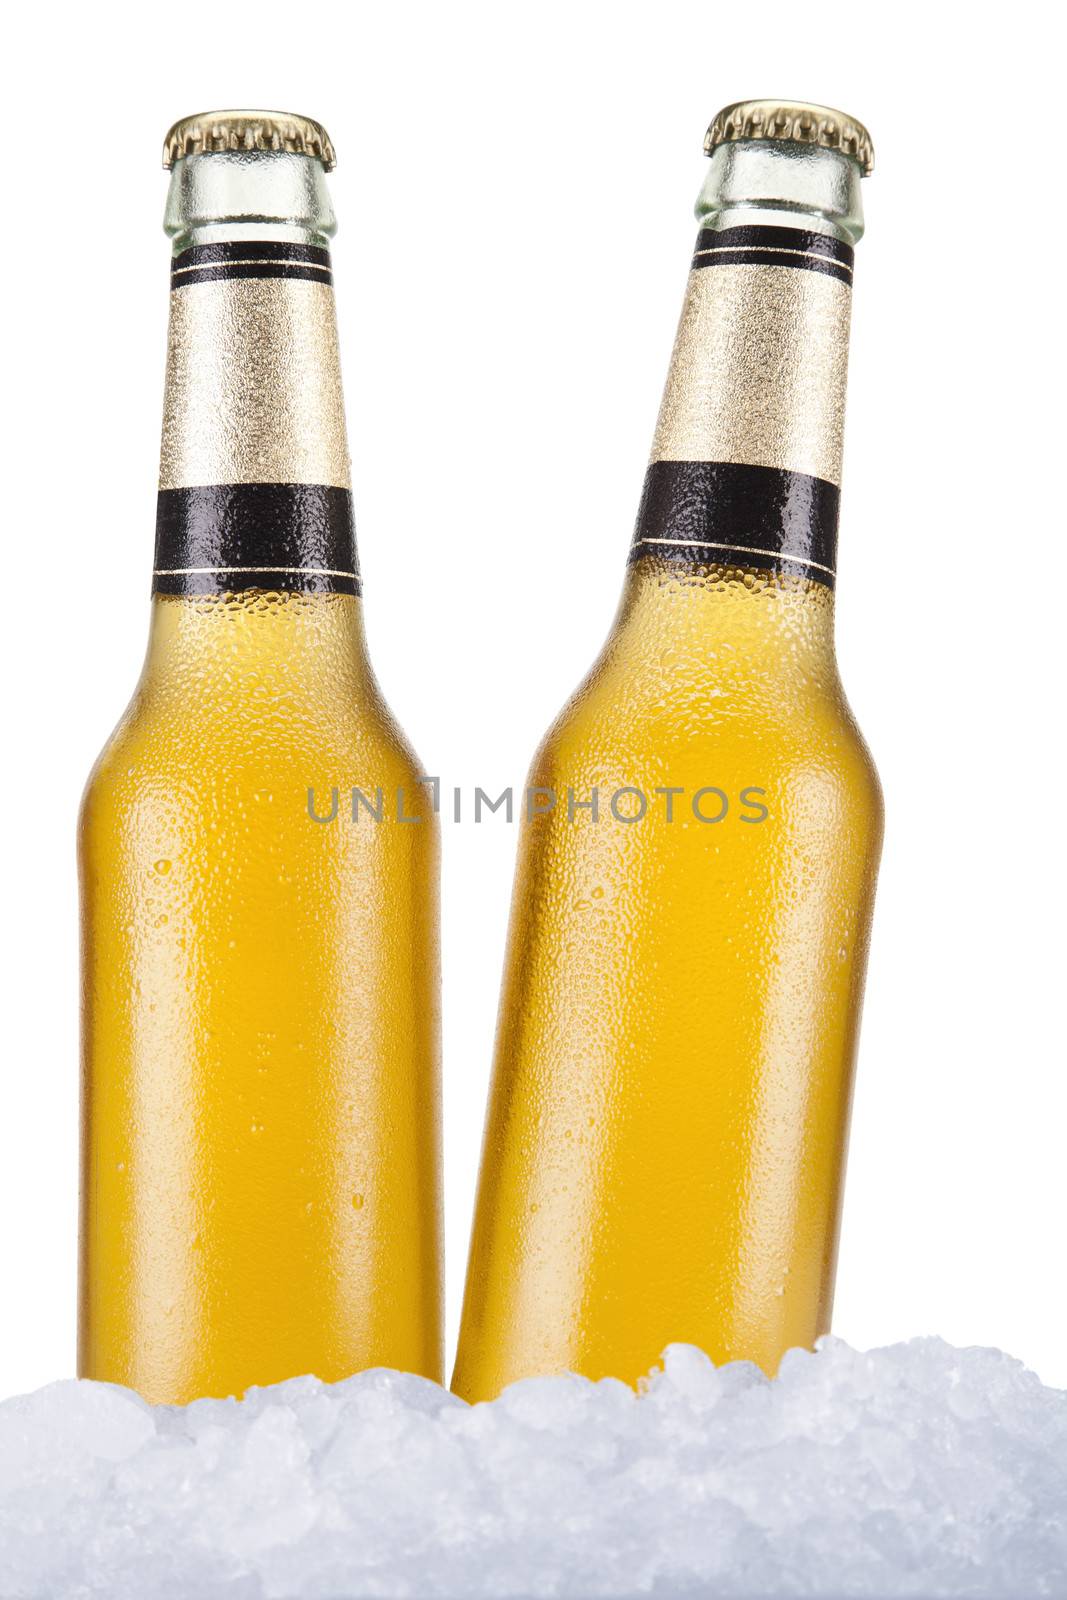 Two beer bottles sitting on ice over a white background.